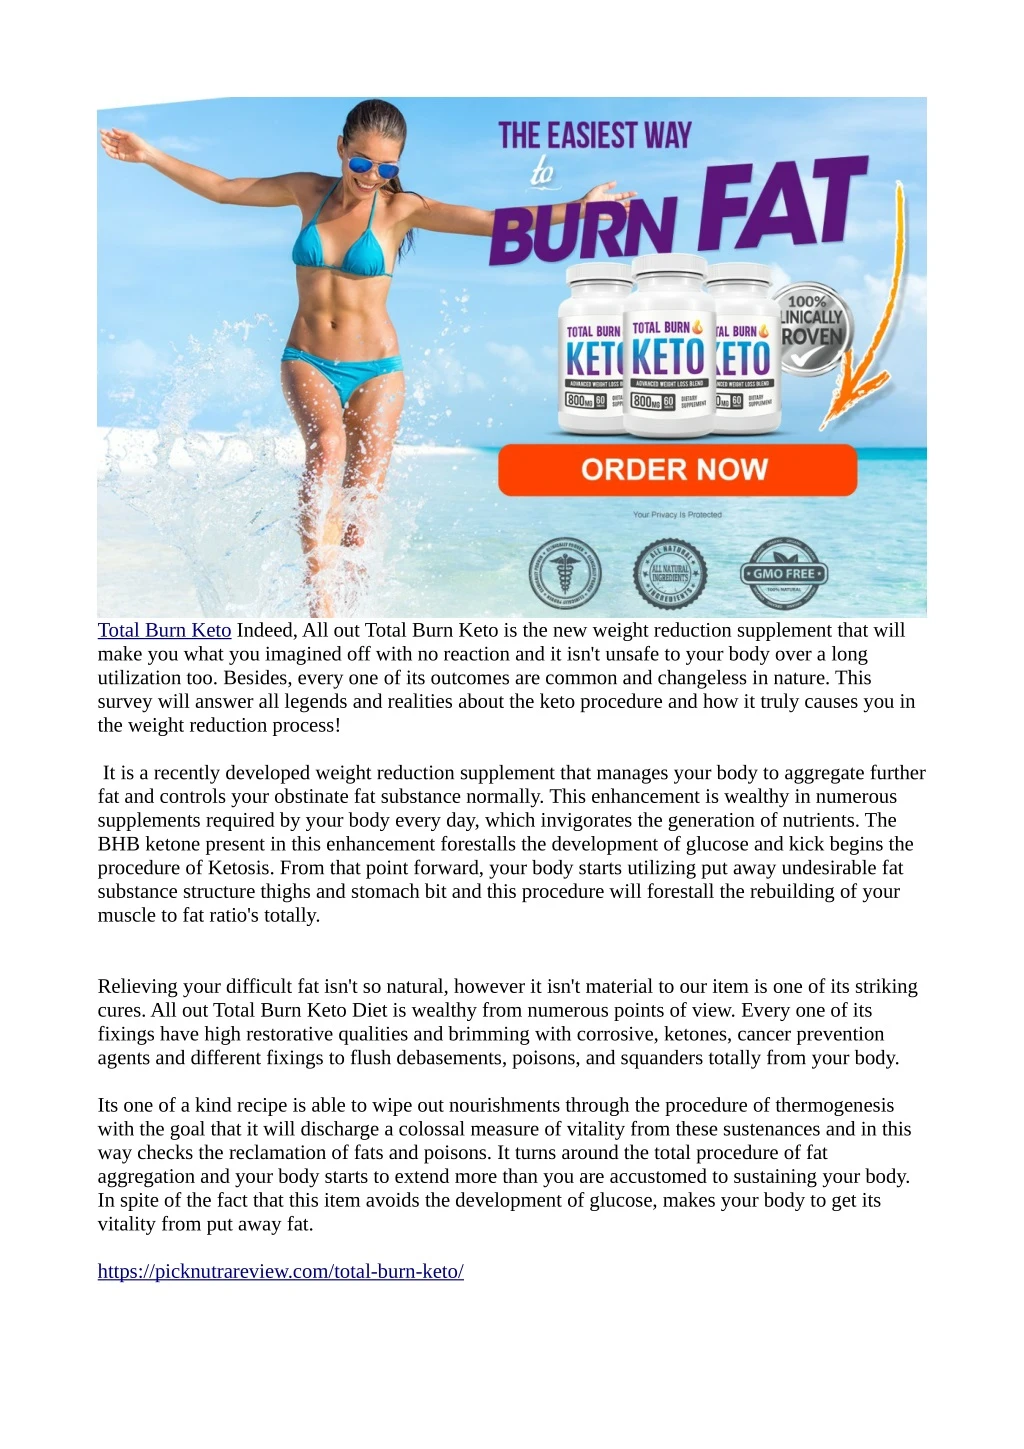 total burn keto indeed all out total burn keto